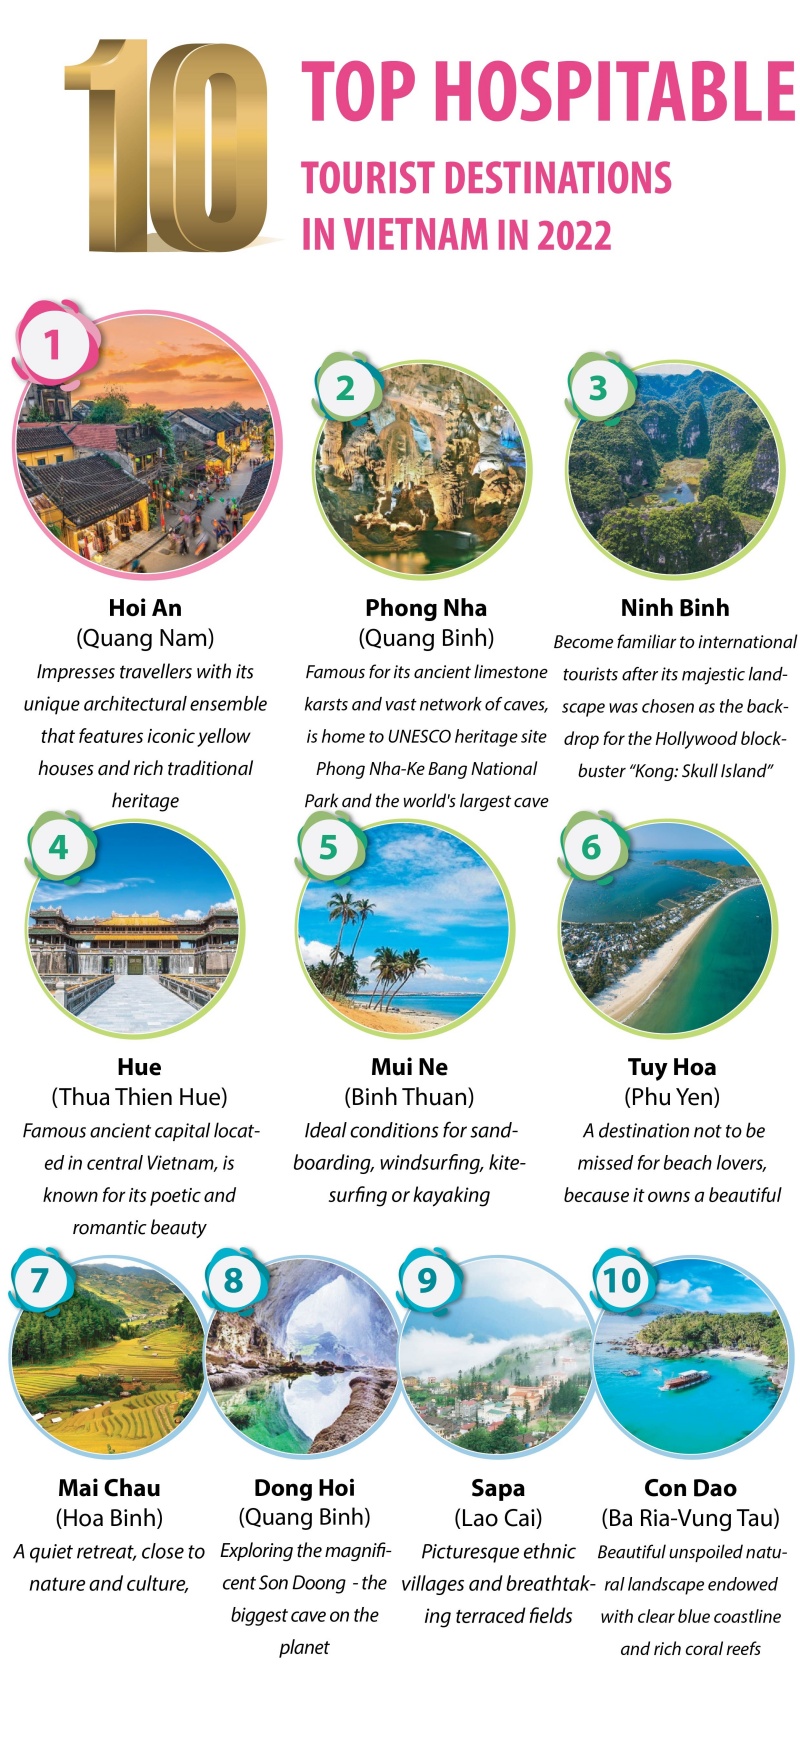 How many days do you need in Vietnam? Ten days is the perfect trip length in Vietnam